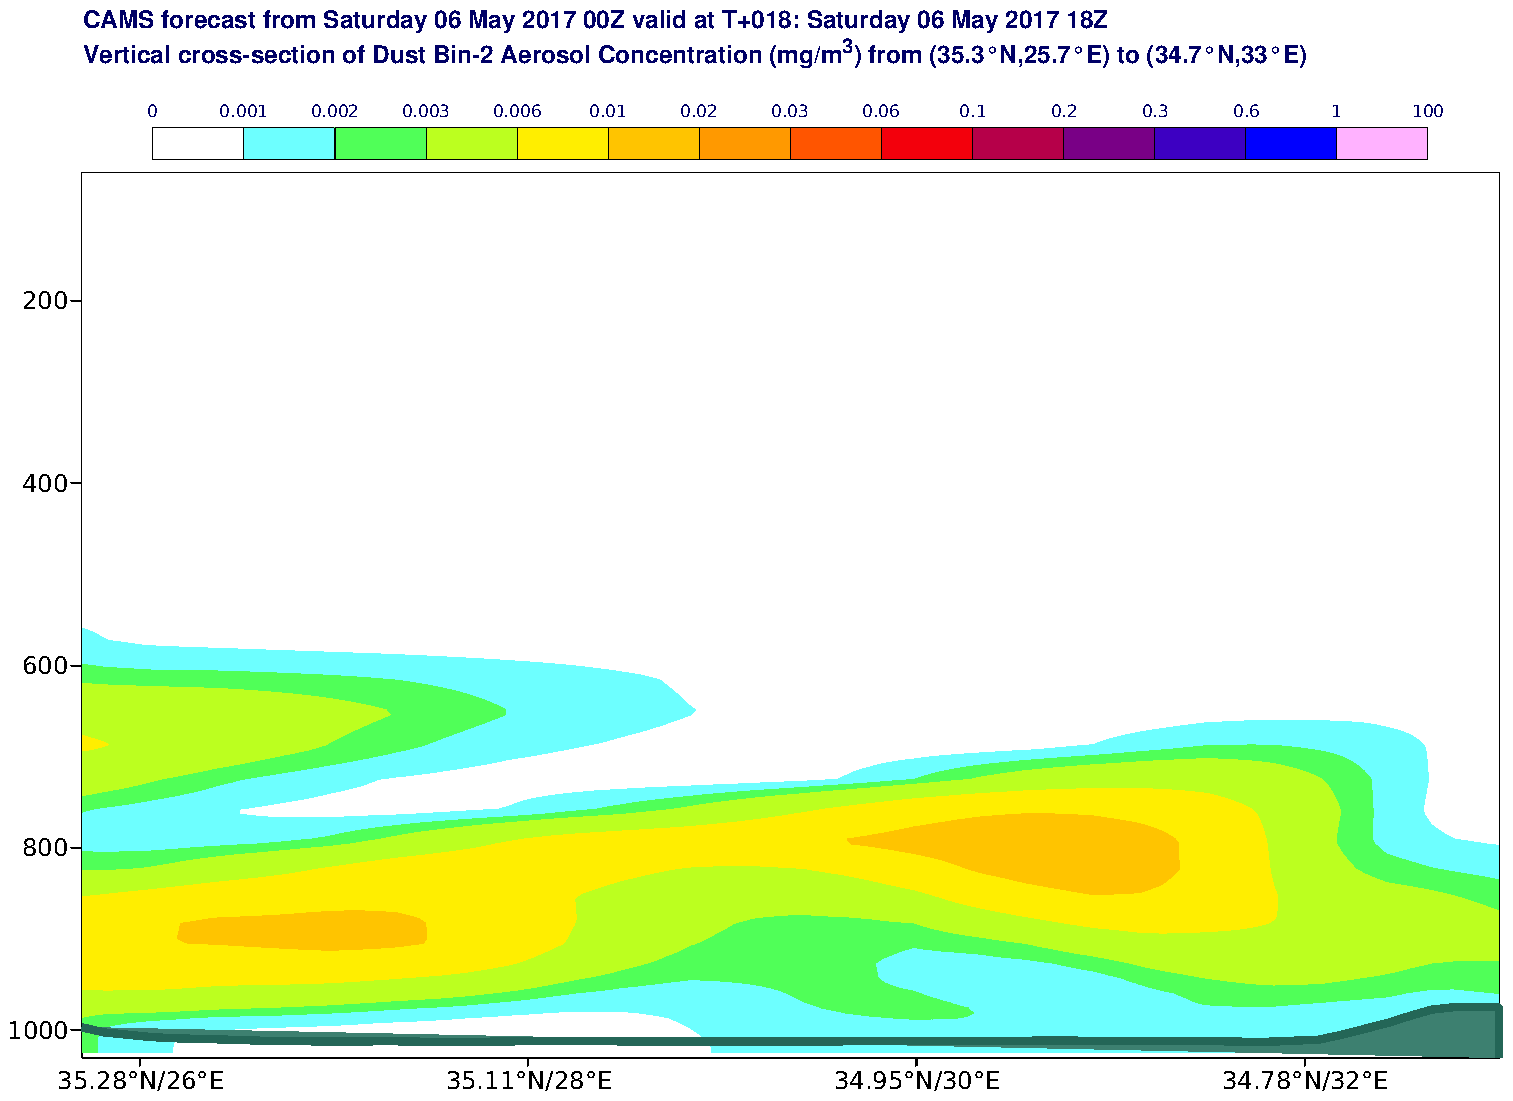 Vertical cross-section of Dust Bin-2 Aerosol Concentration (mg/m3) valid at T18 - 2017-05-06 18:00